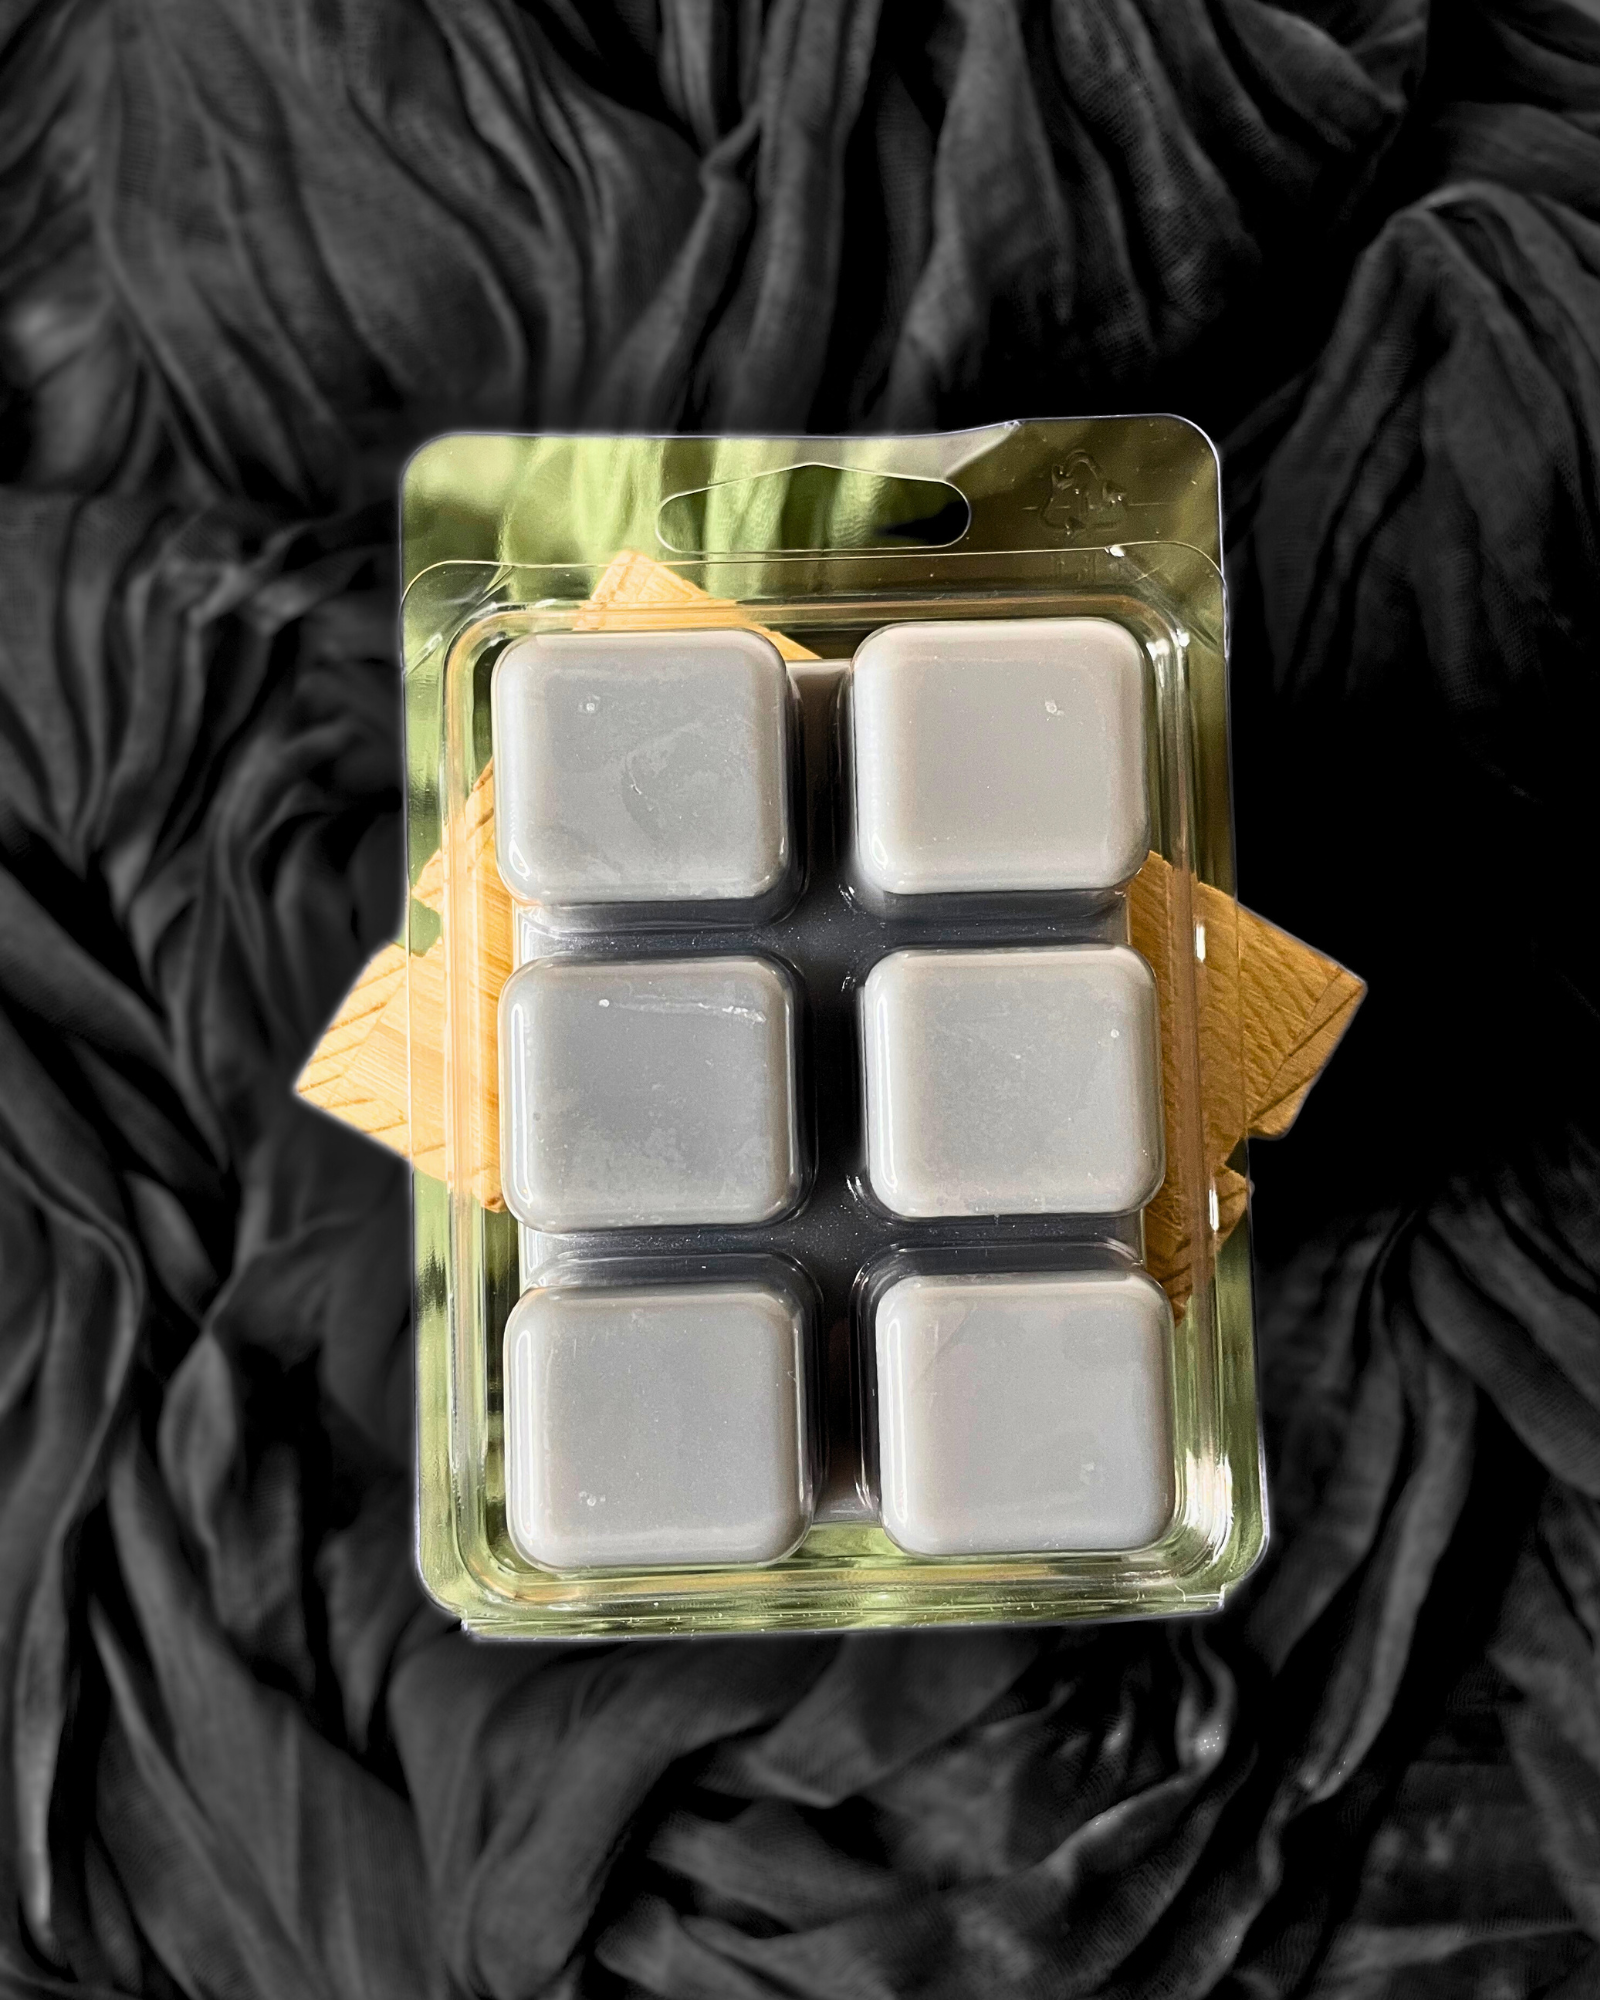 Sandalwood Tobacco Soy Wax Melts is truly a unique and captivating scent that is sure to please anyone looking for a warm and cozy aroma. The combination of tobacco leaf and cedar creates a deep, musky scent that is both luxurious and masculine. The addition of sandalwood adds a touch of sweetness to the blend, while the soft moss finish brings a subtle earthiness to the overall aroma. www.farmhousecharmcandles.com